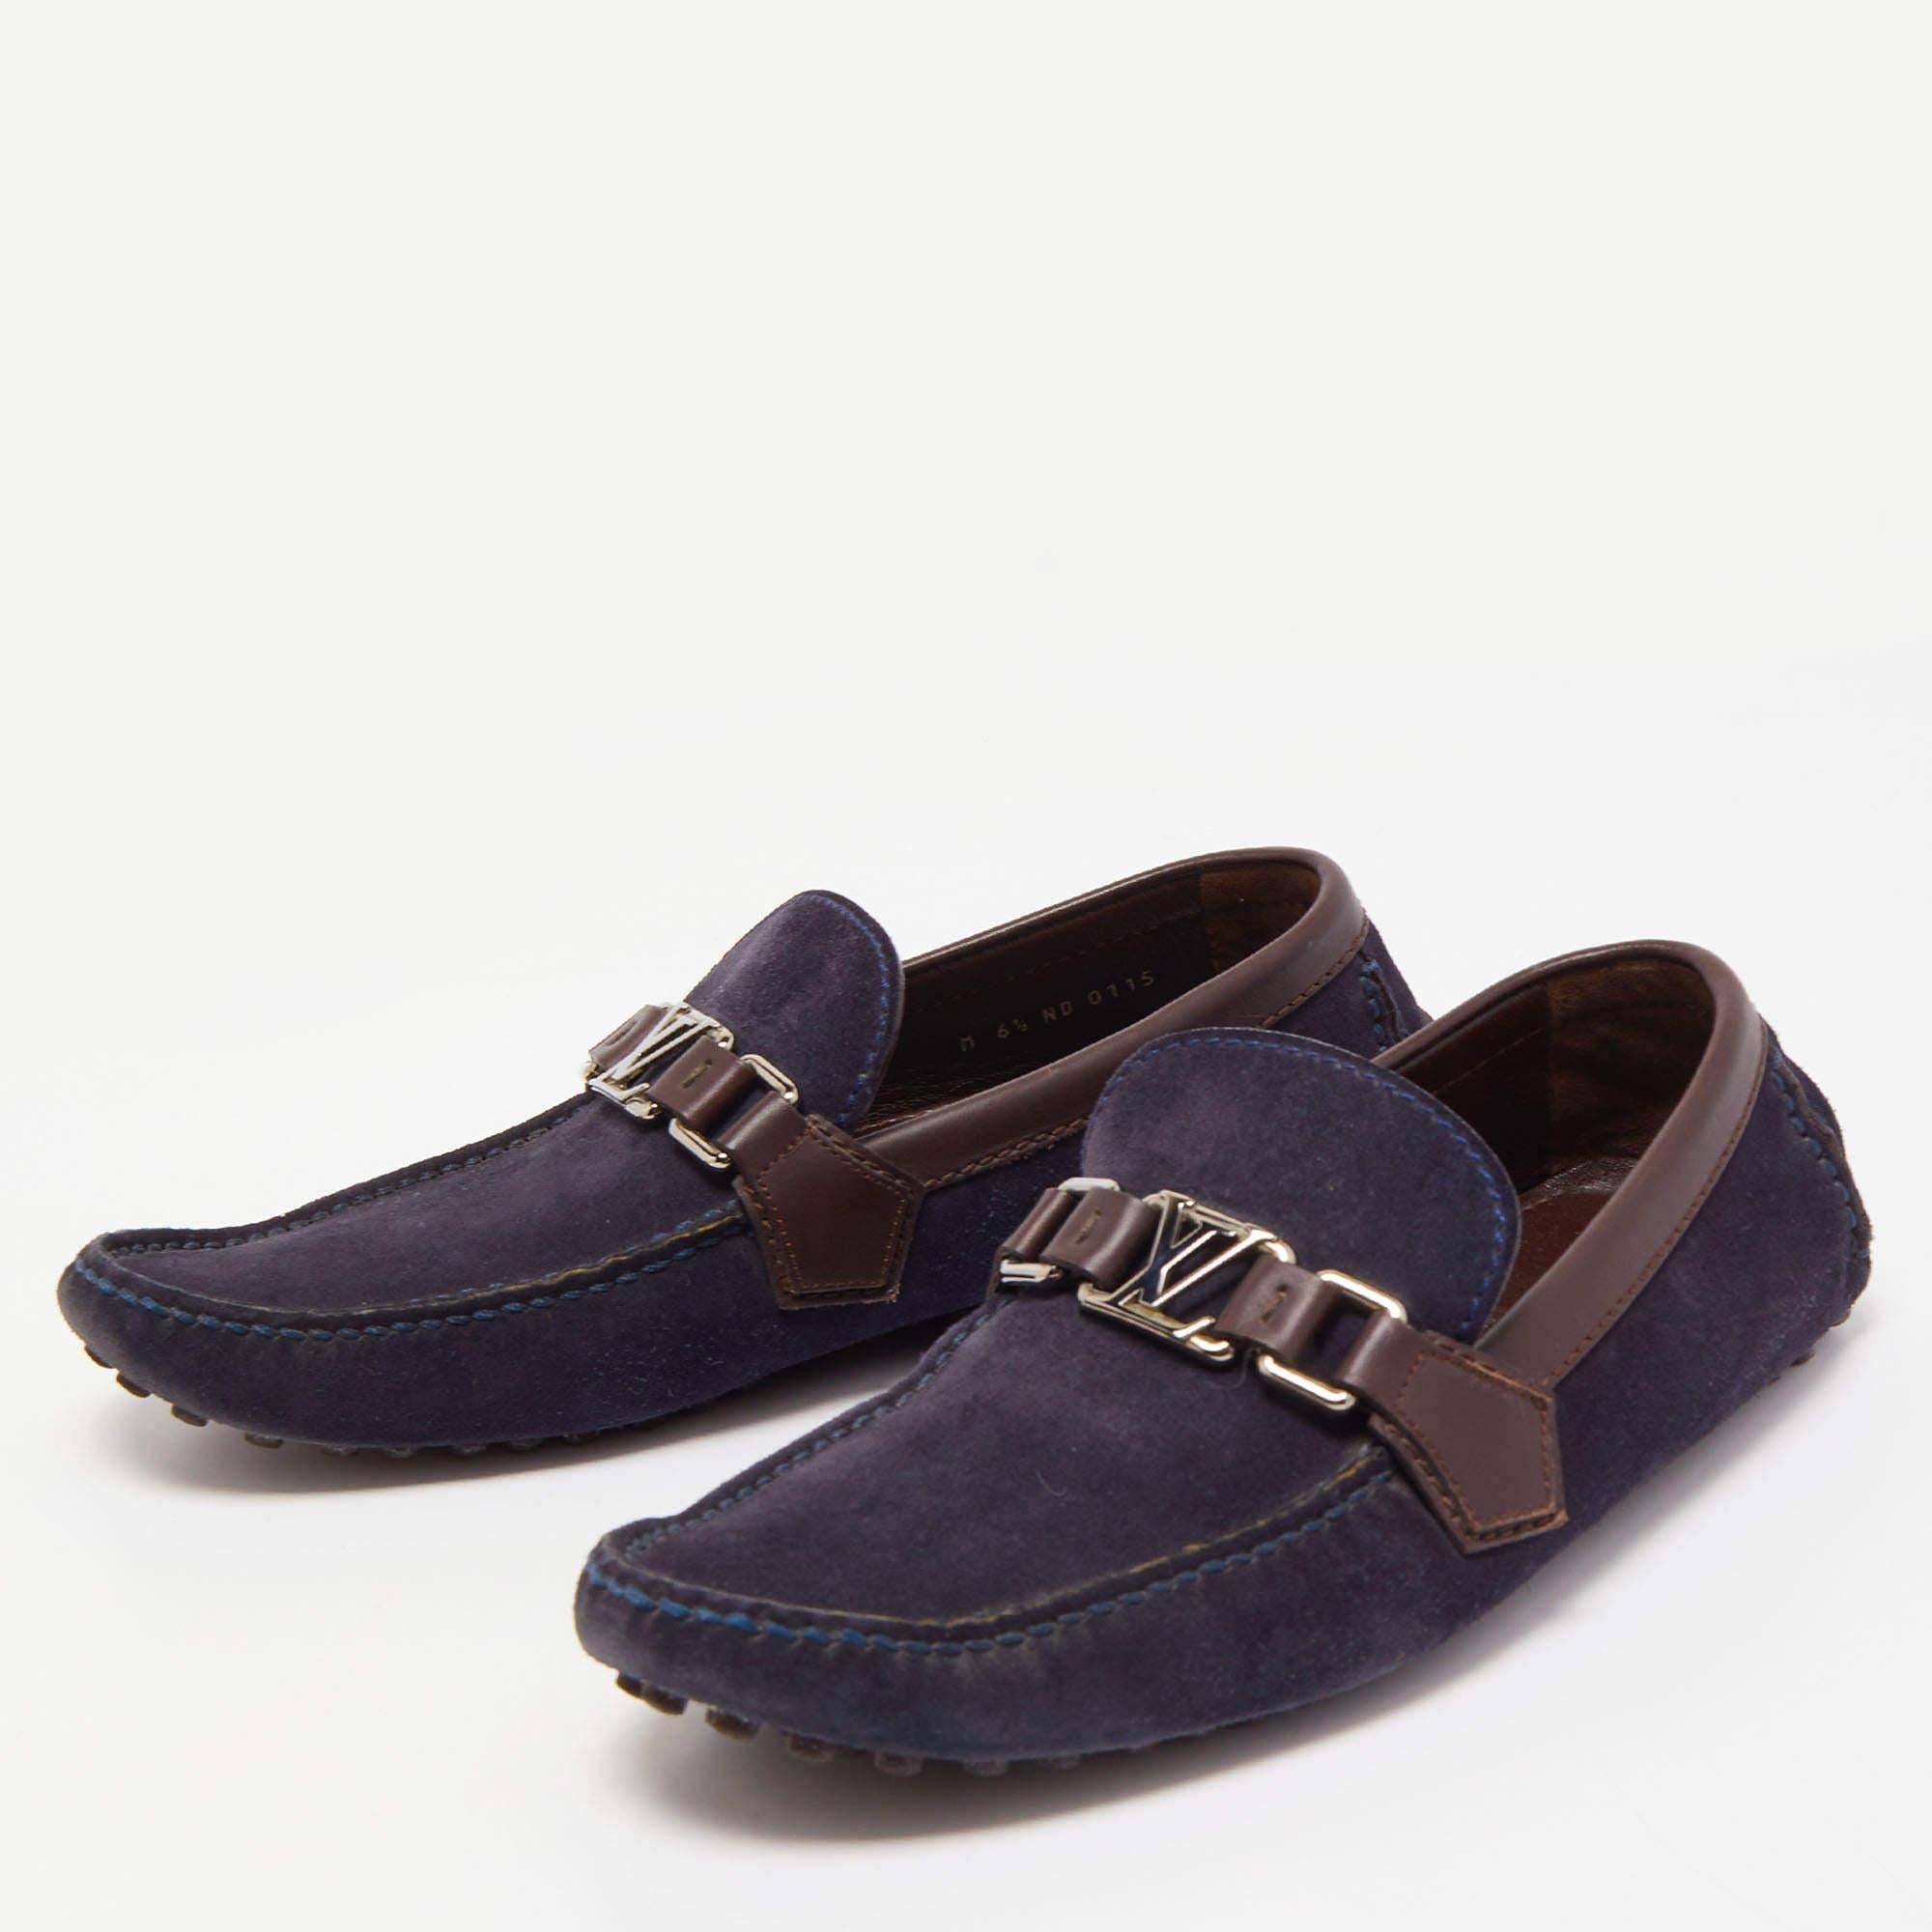 Louis Vuitton Navy Blue/Brown Suede and Leather Hockenheim Slip On Loafers Size  In Good Condition For Sale In Dubai, Al Qouz 2